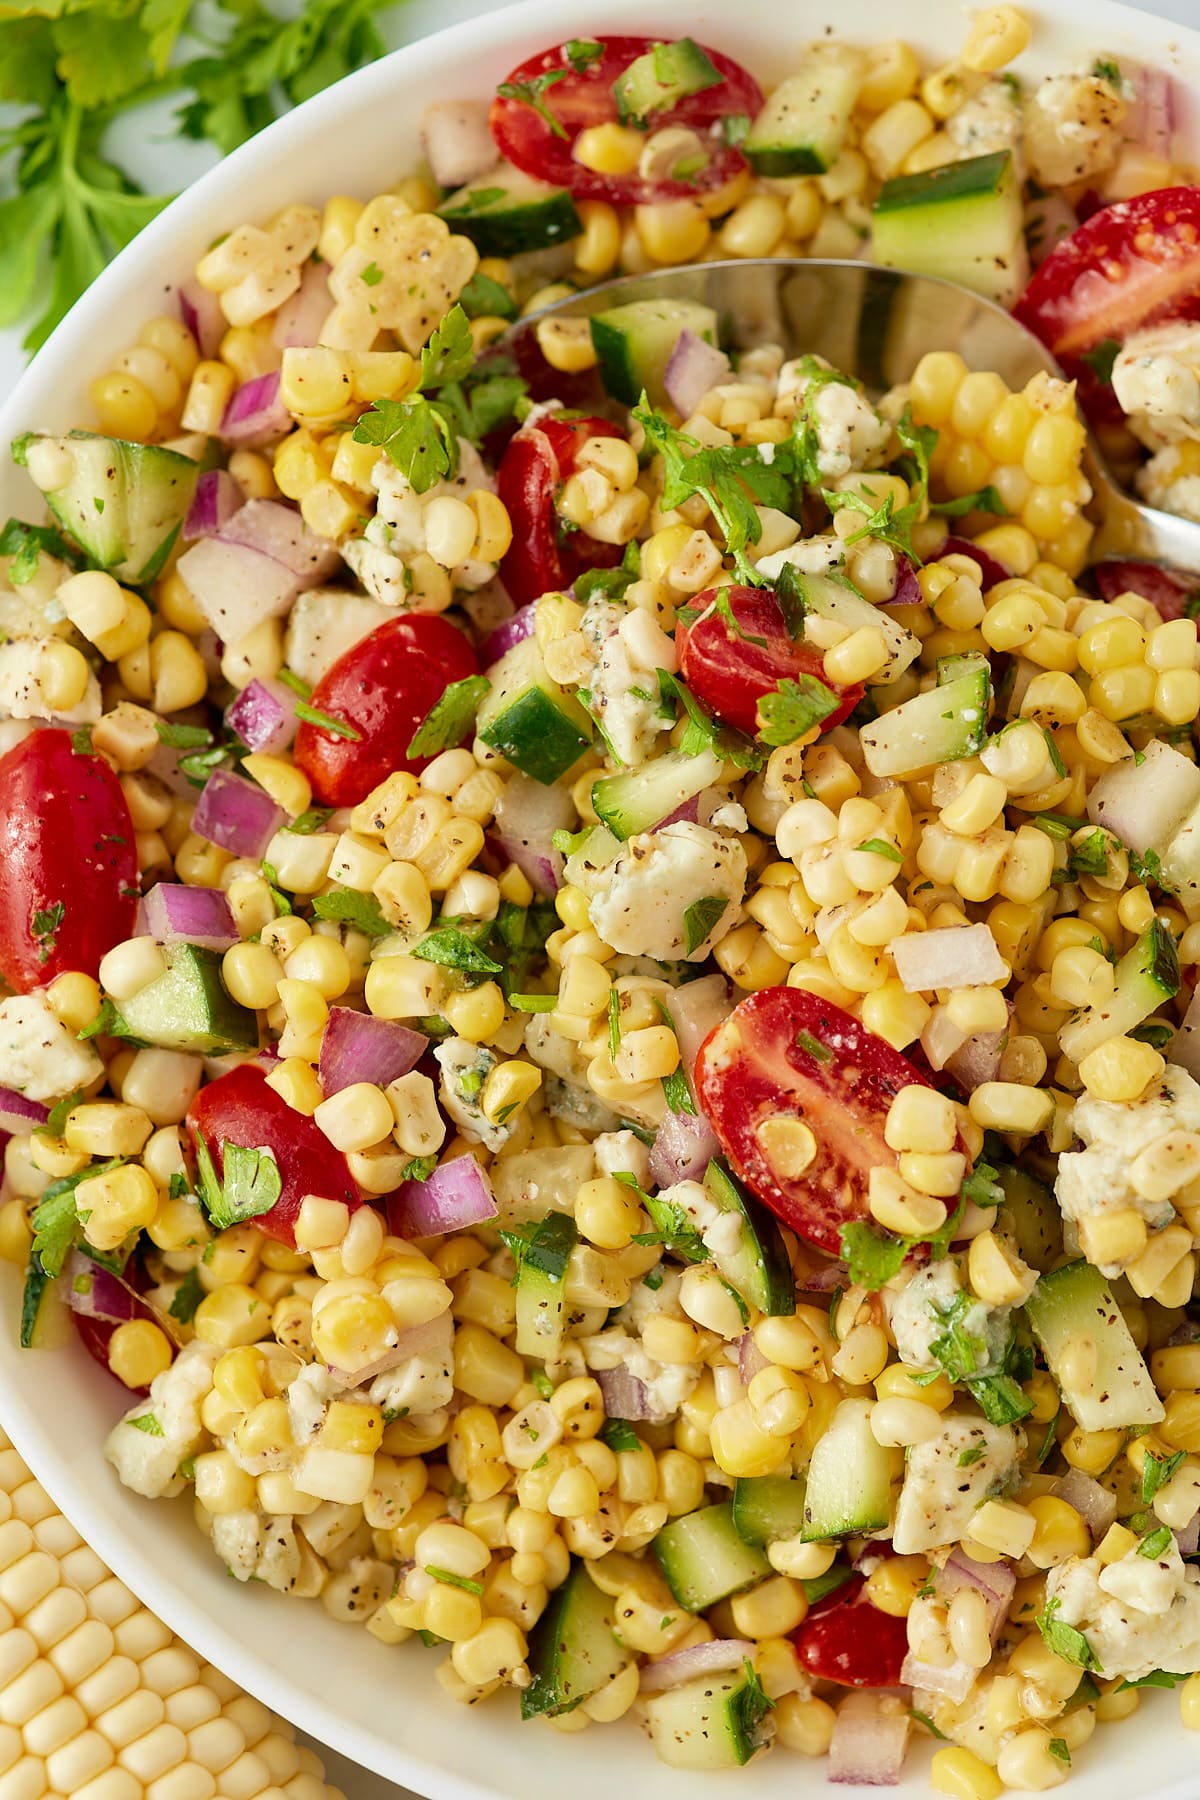 Corn salad with fresh vegetables in a bowl.